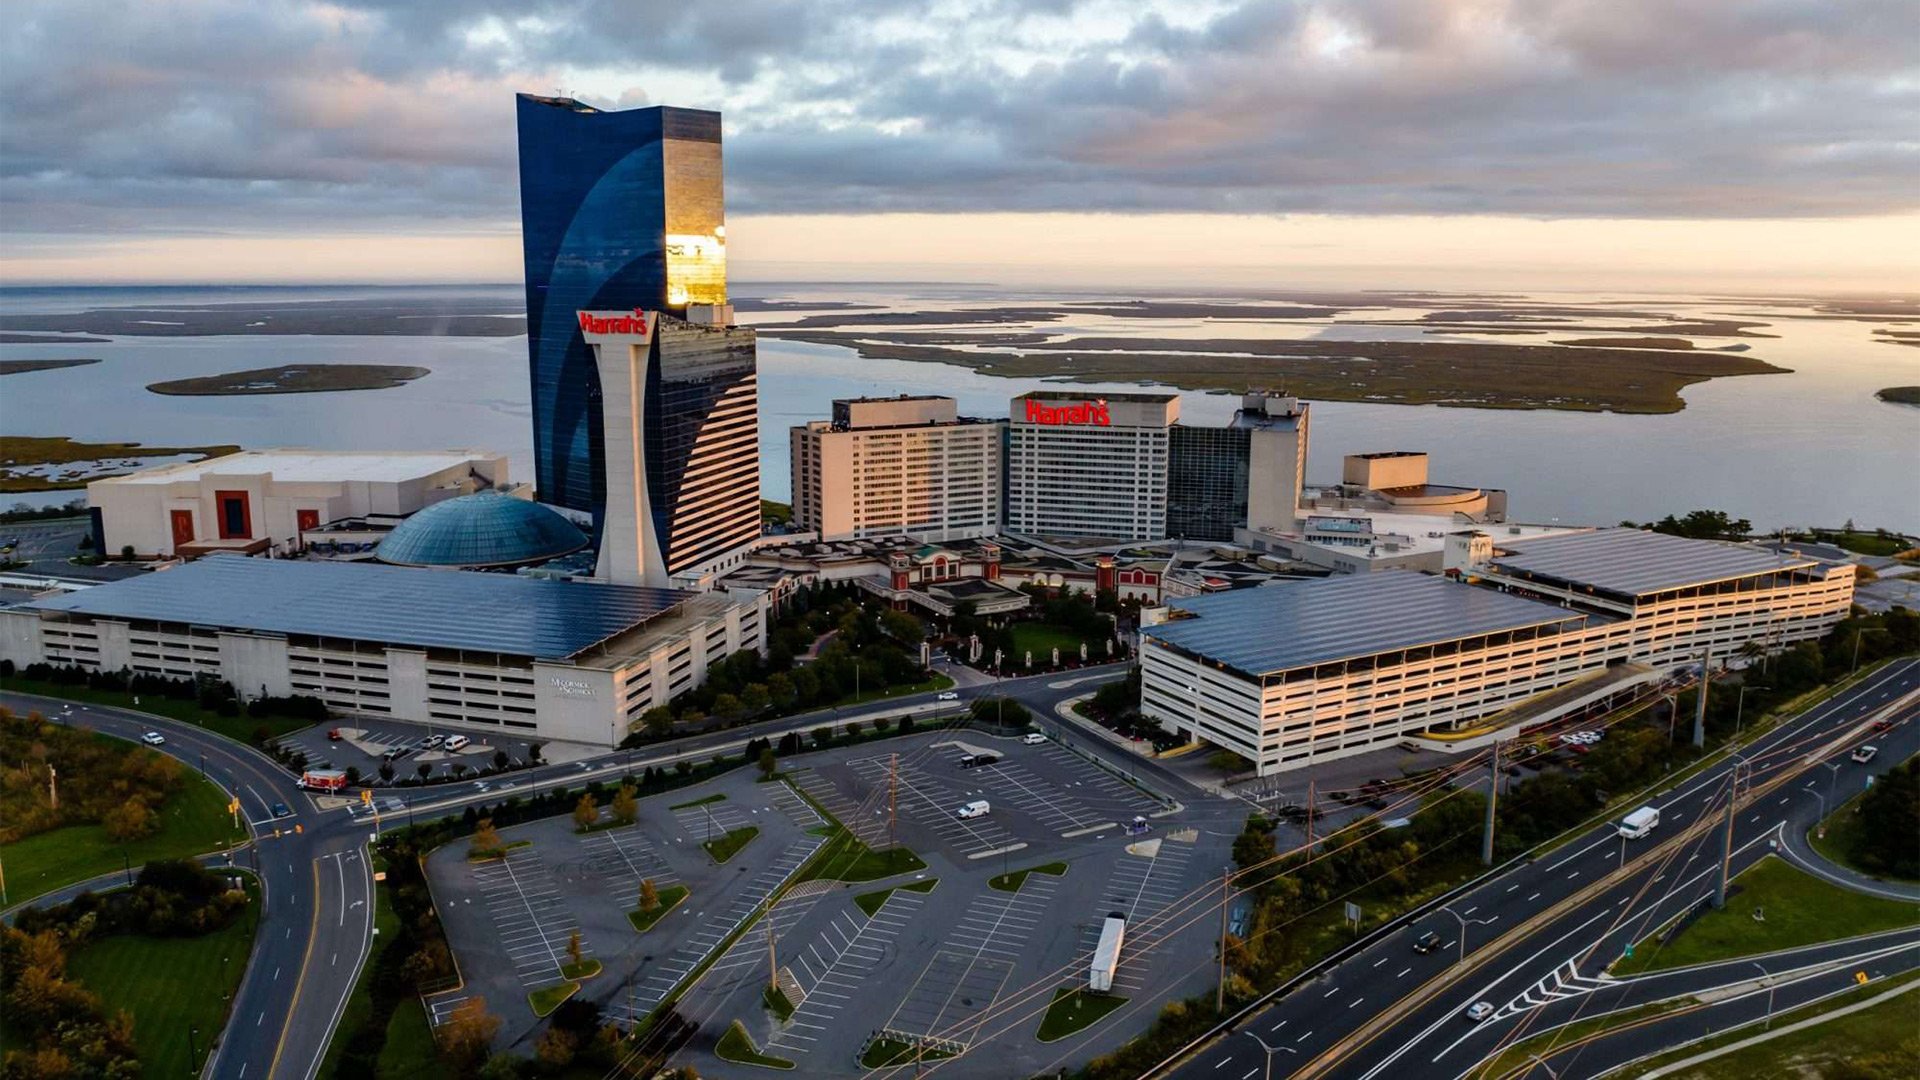 Atlantic City casinos demonstrate commitment to sustainability in conmmemoration of Earth Day